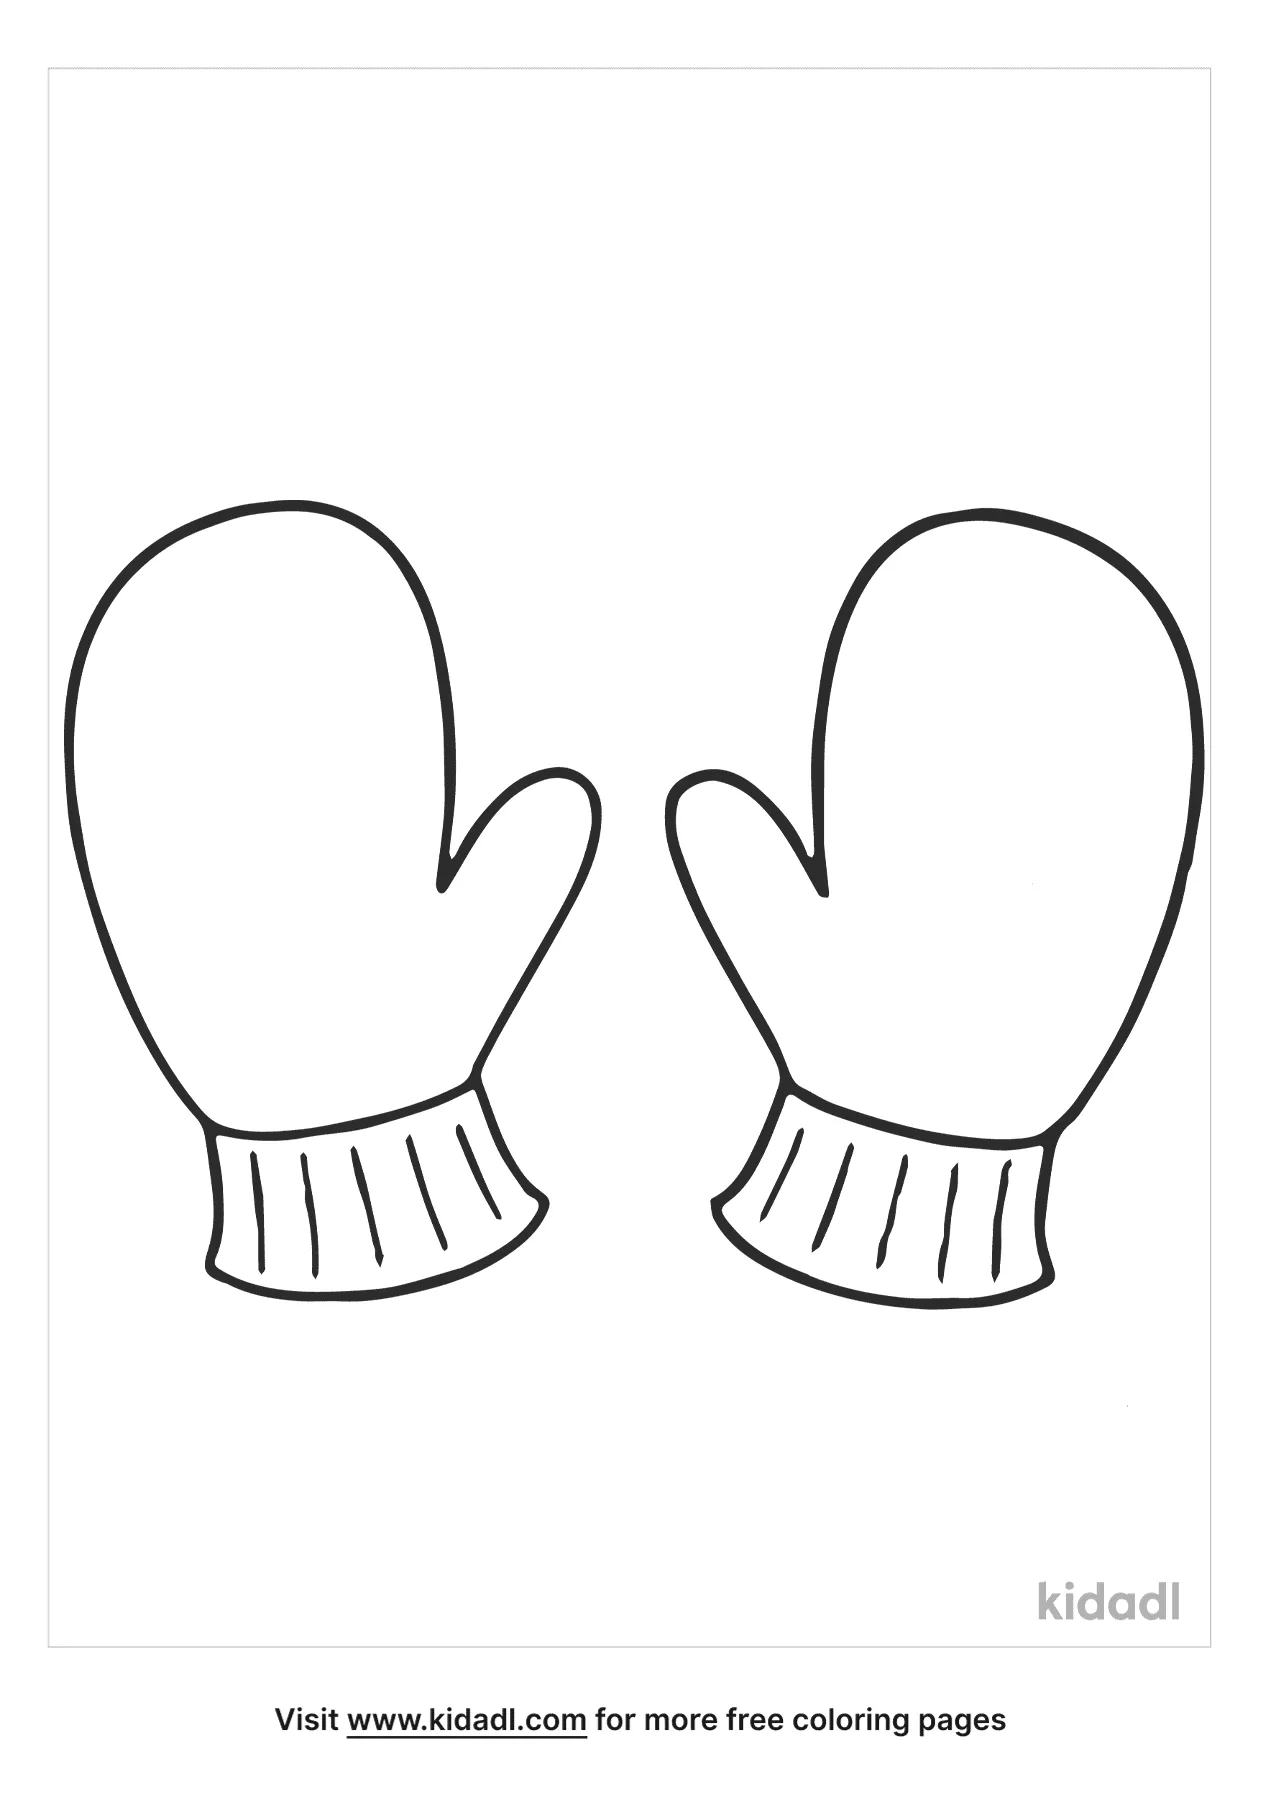 Free mittens coloring page coloring page printables